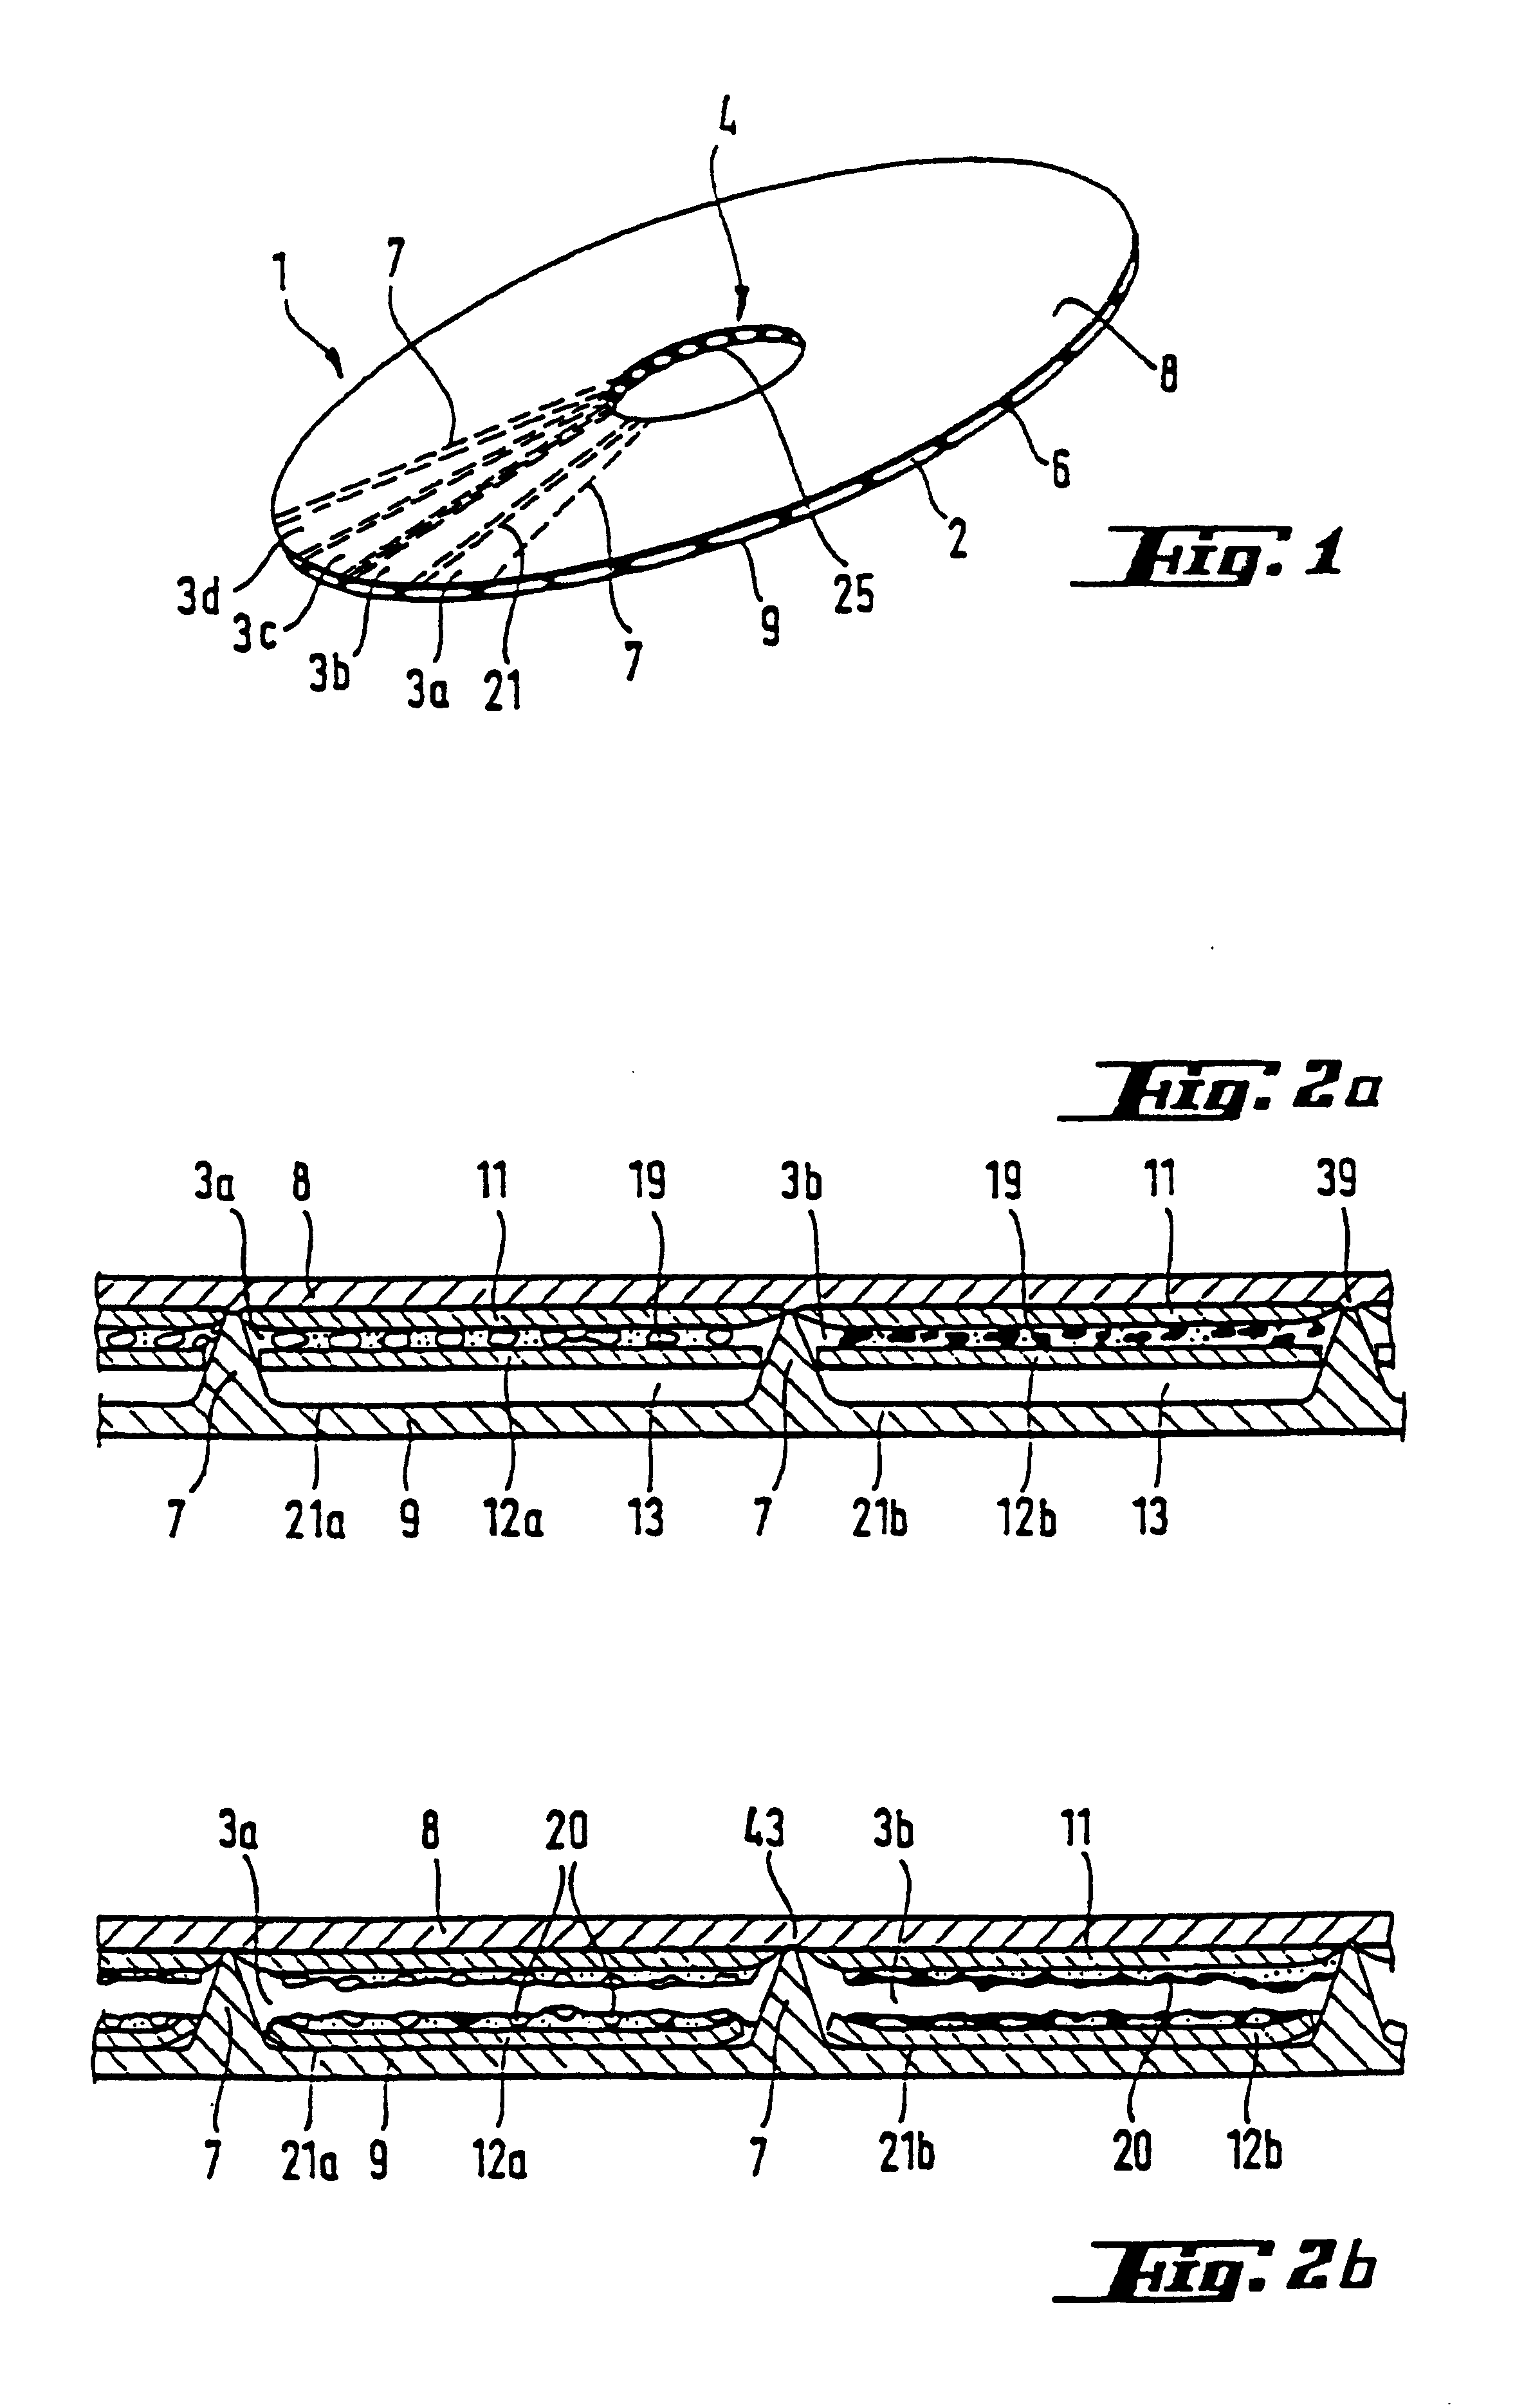 Method of supplying substances to be dispensed into air